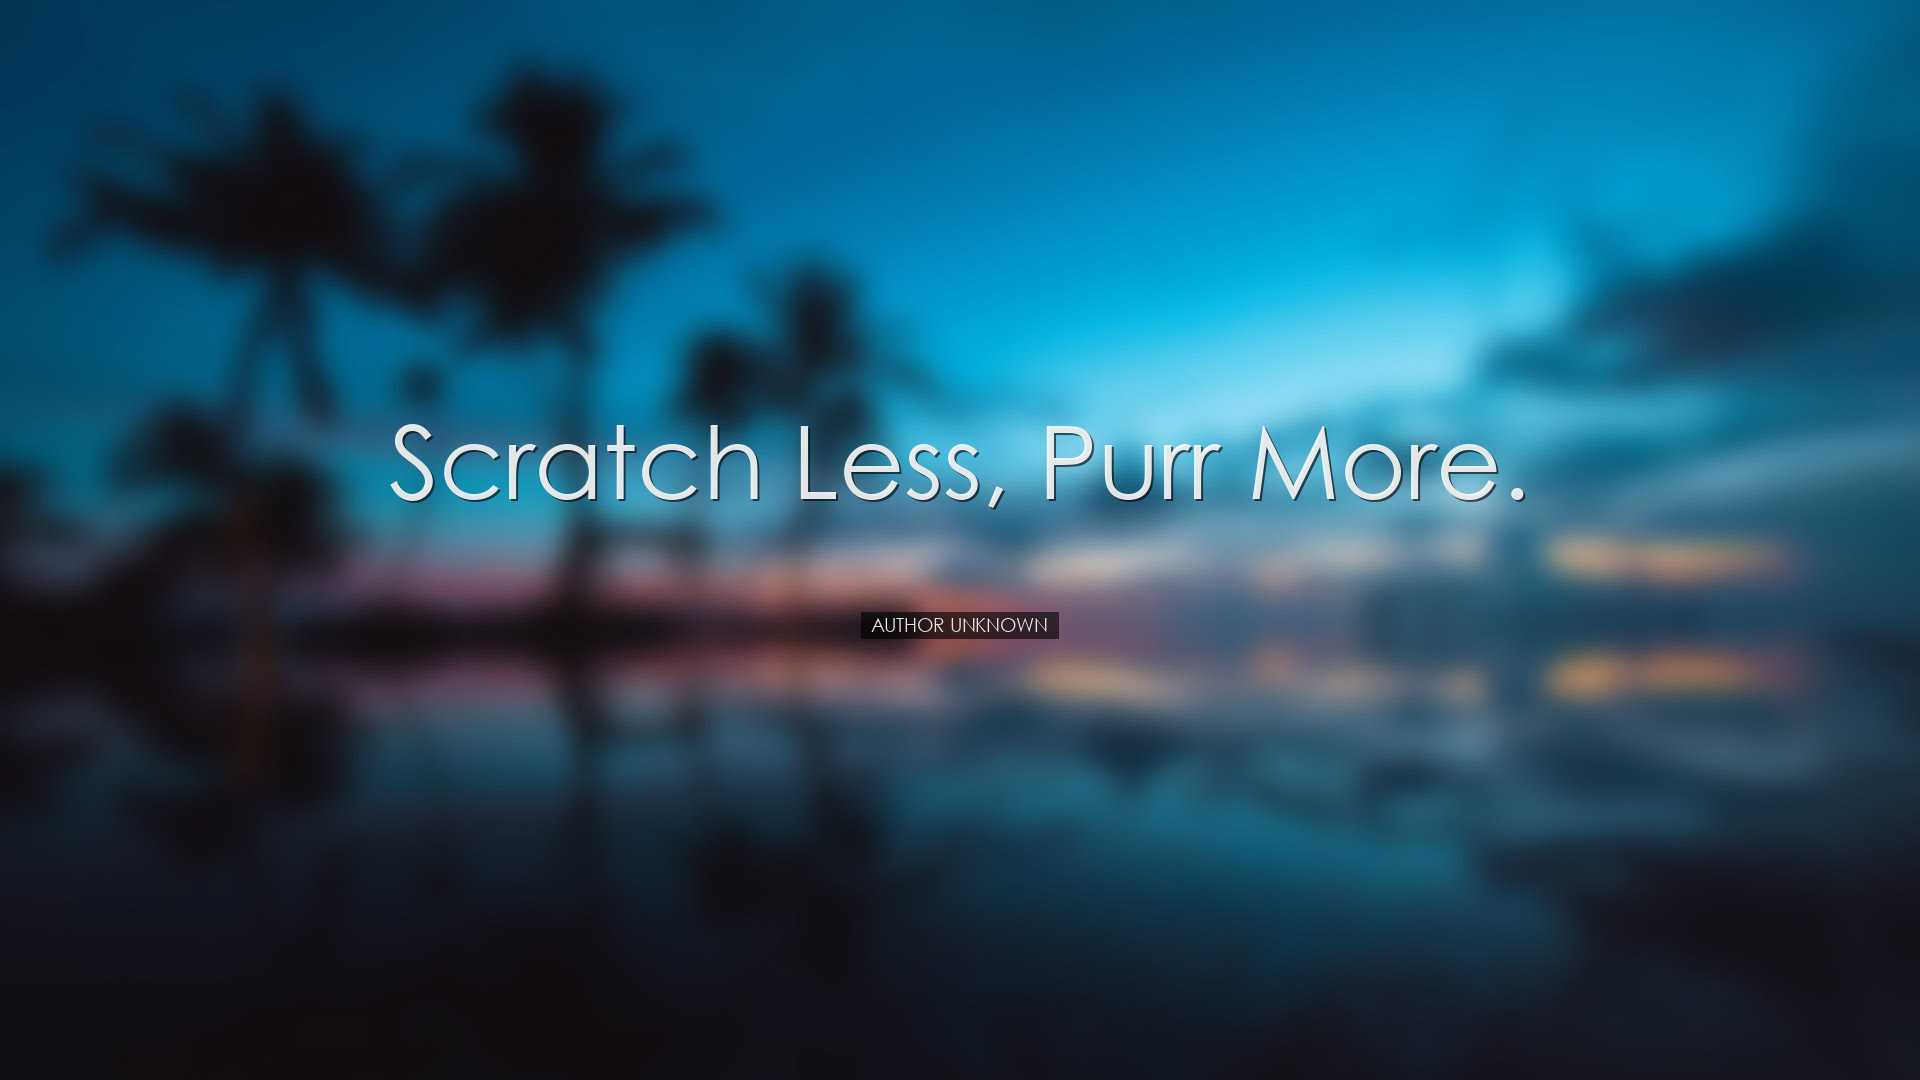 Scratch less, purr more. - Author Unknown